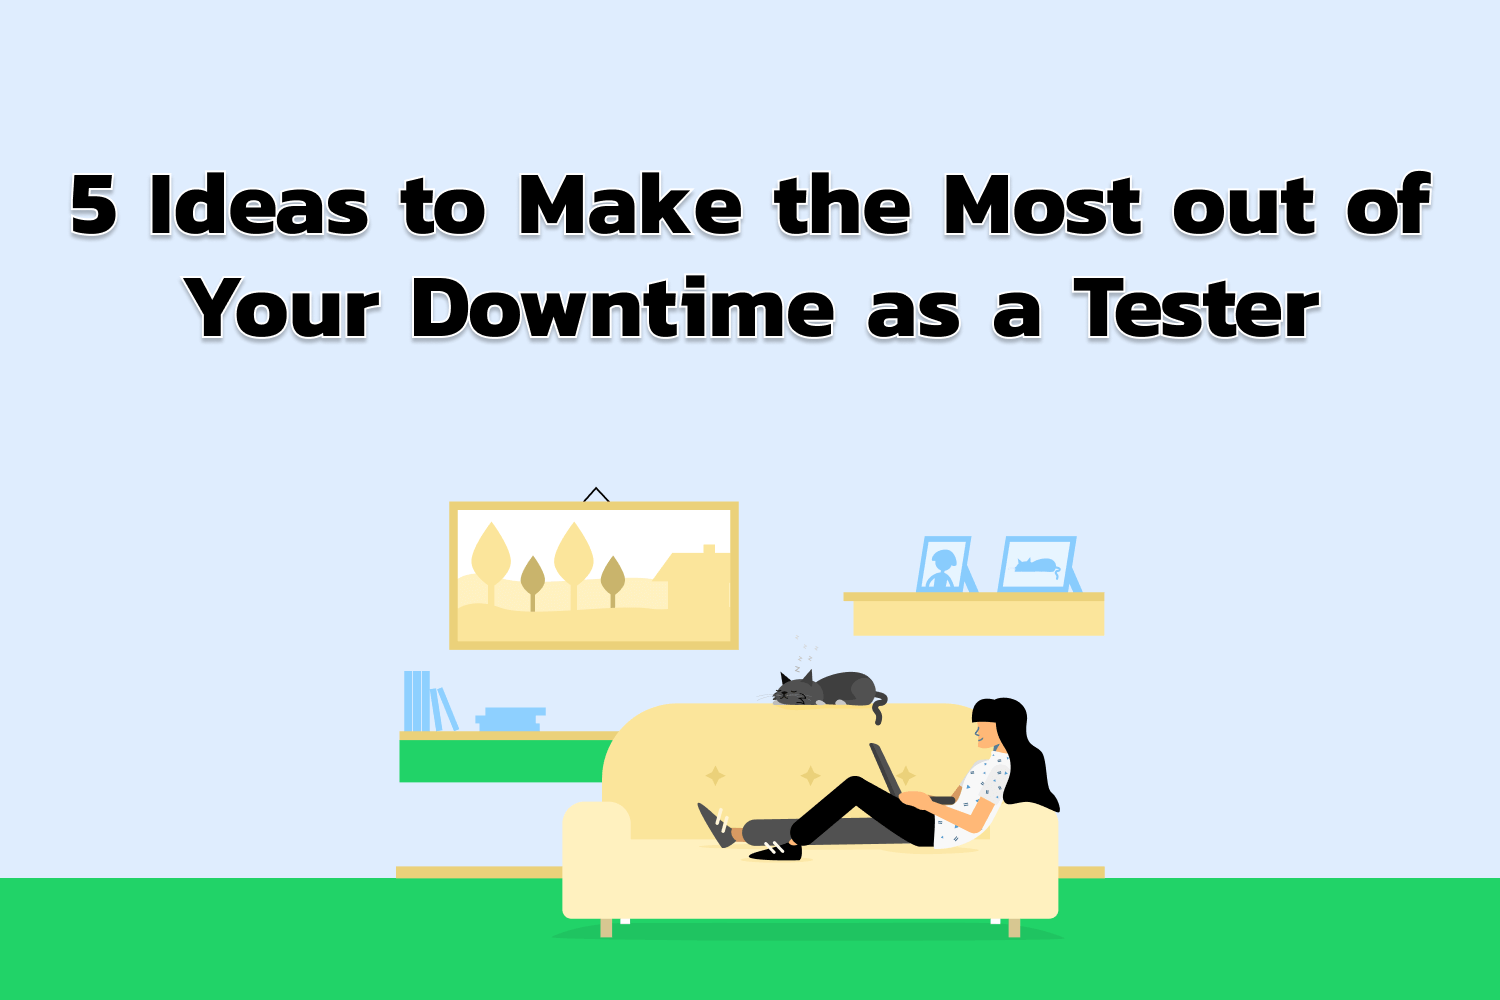 5 Ideas to Make the Most out of Your Downtime as a Tester